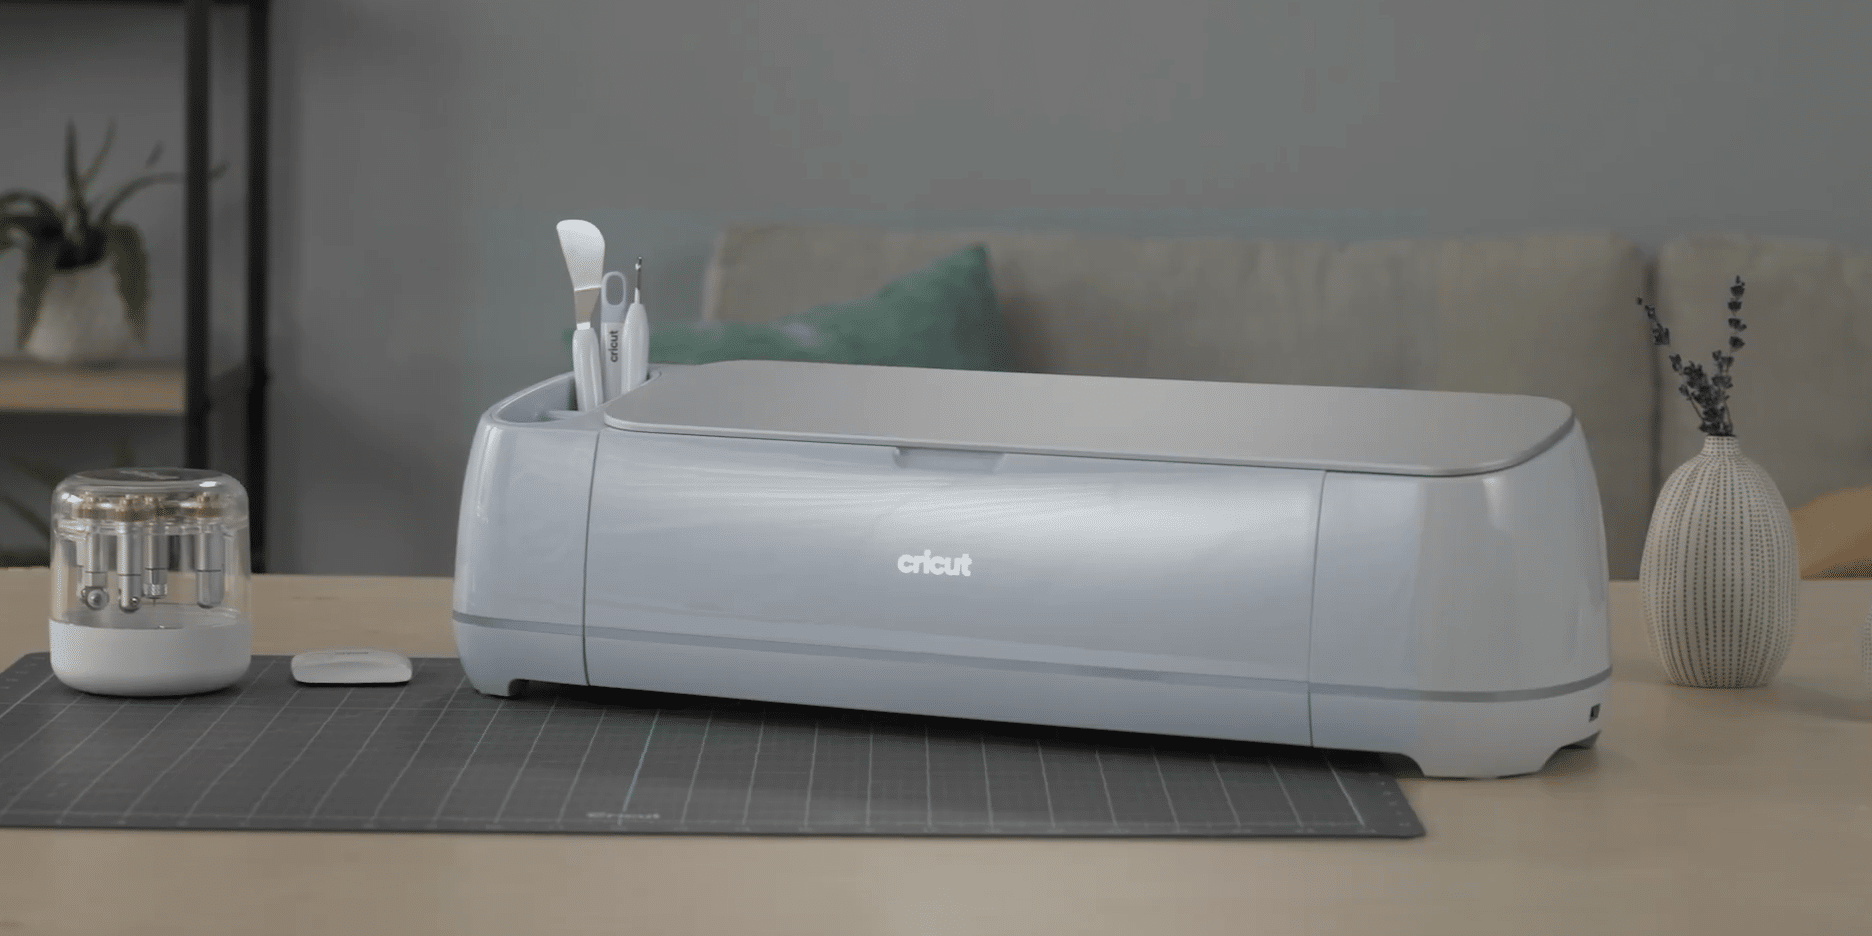 How to Pick the Right Cricut Materials for Your Next Project